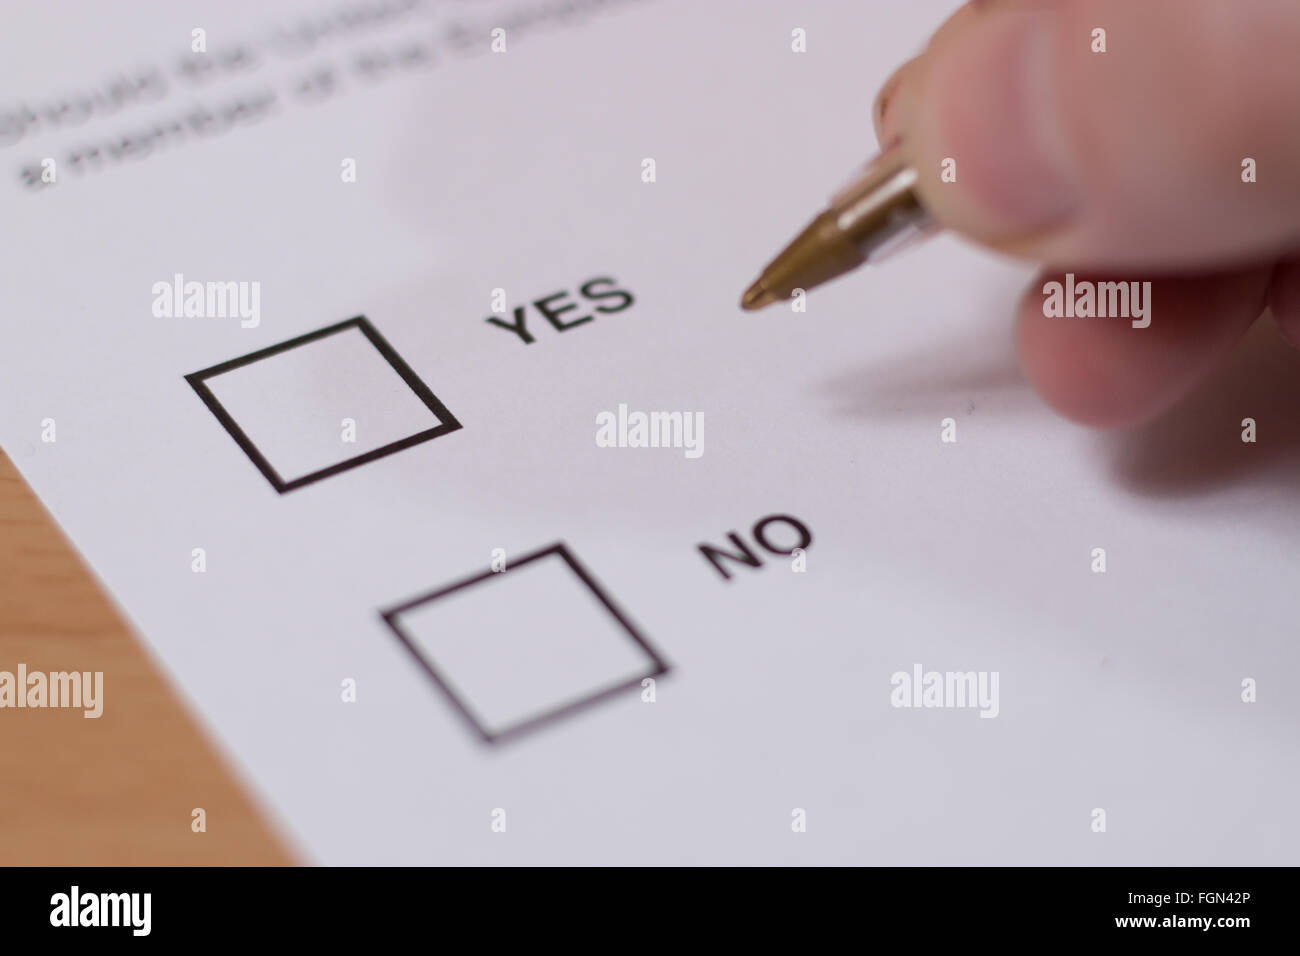 Someone choosing between YES or NO options on a voting ballot. Stock Photo